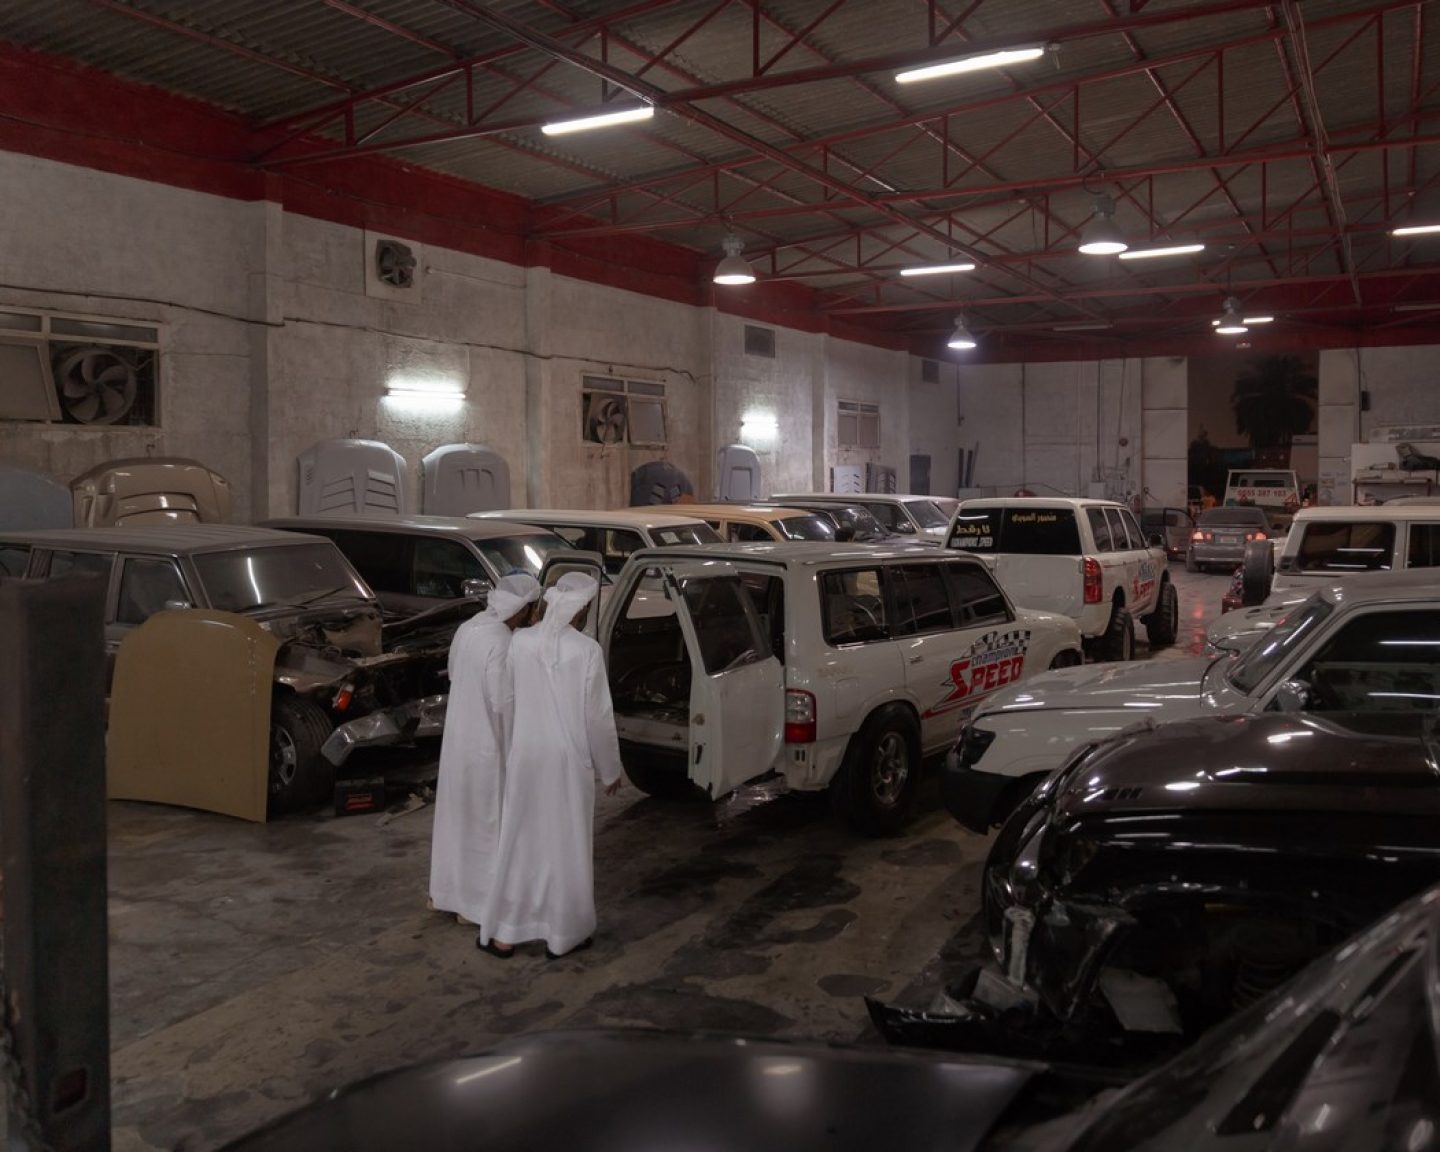 Champions Speed garage in Dubai where SUVs are tuned for drifting